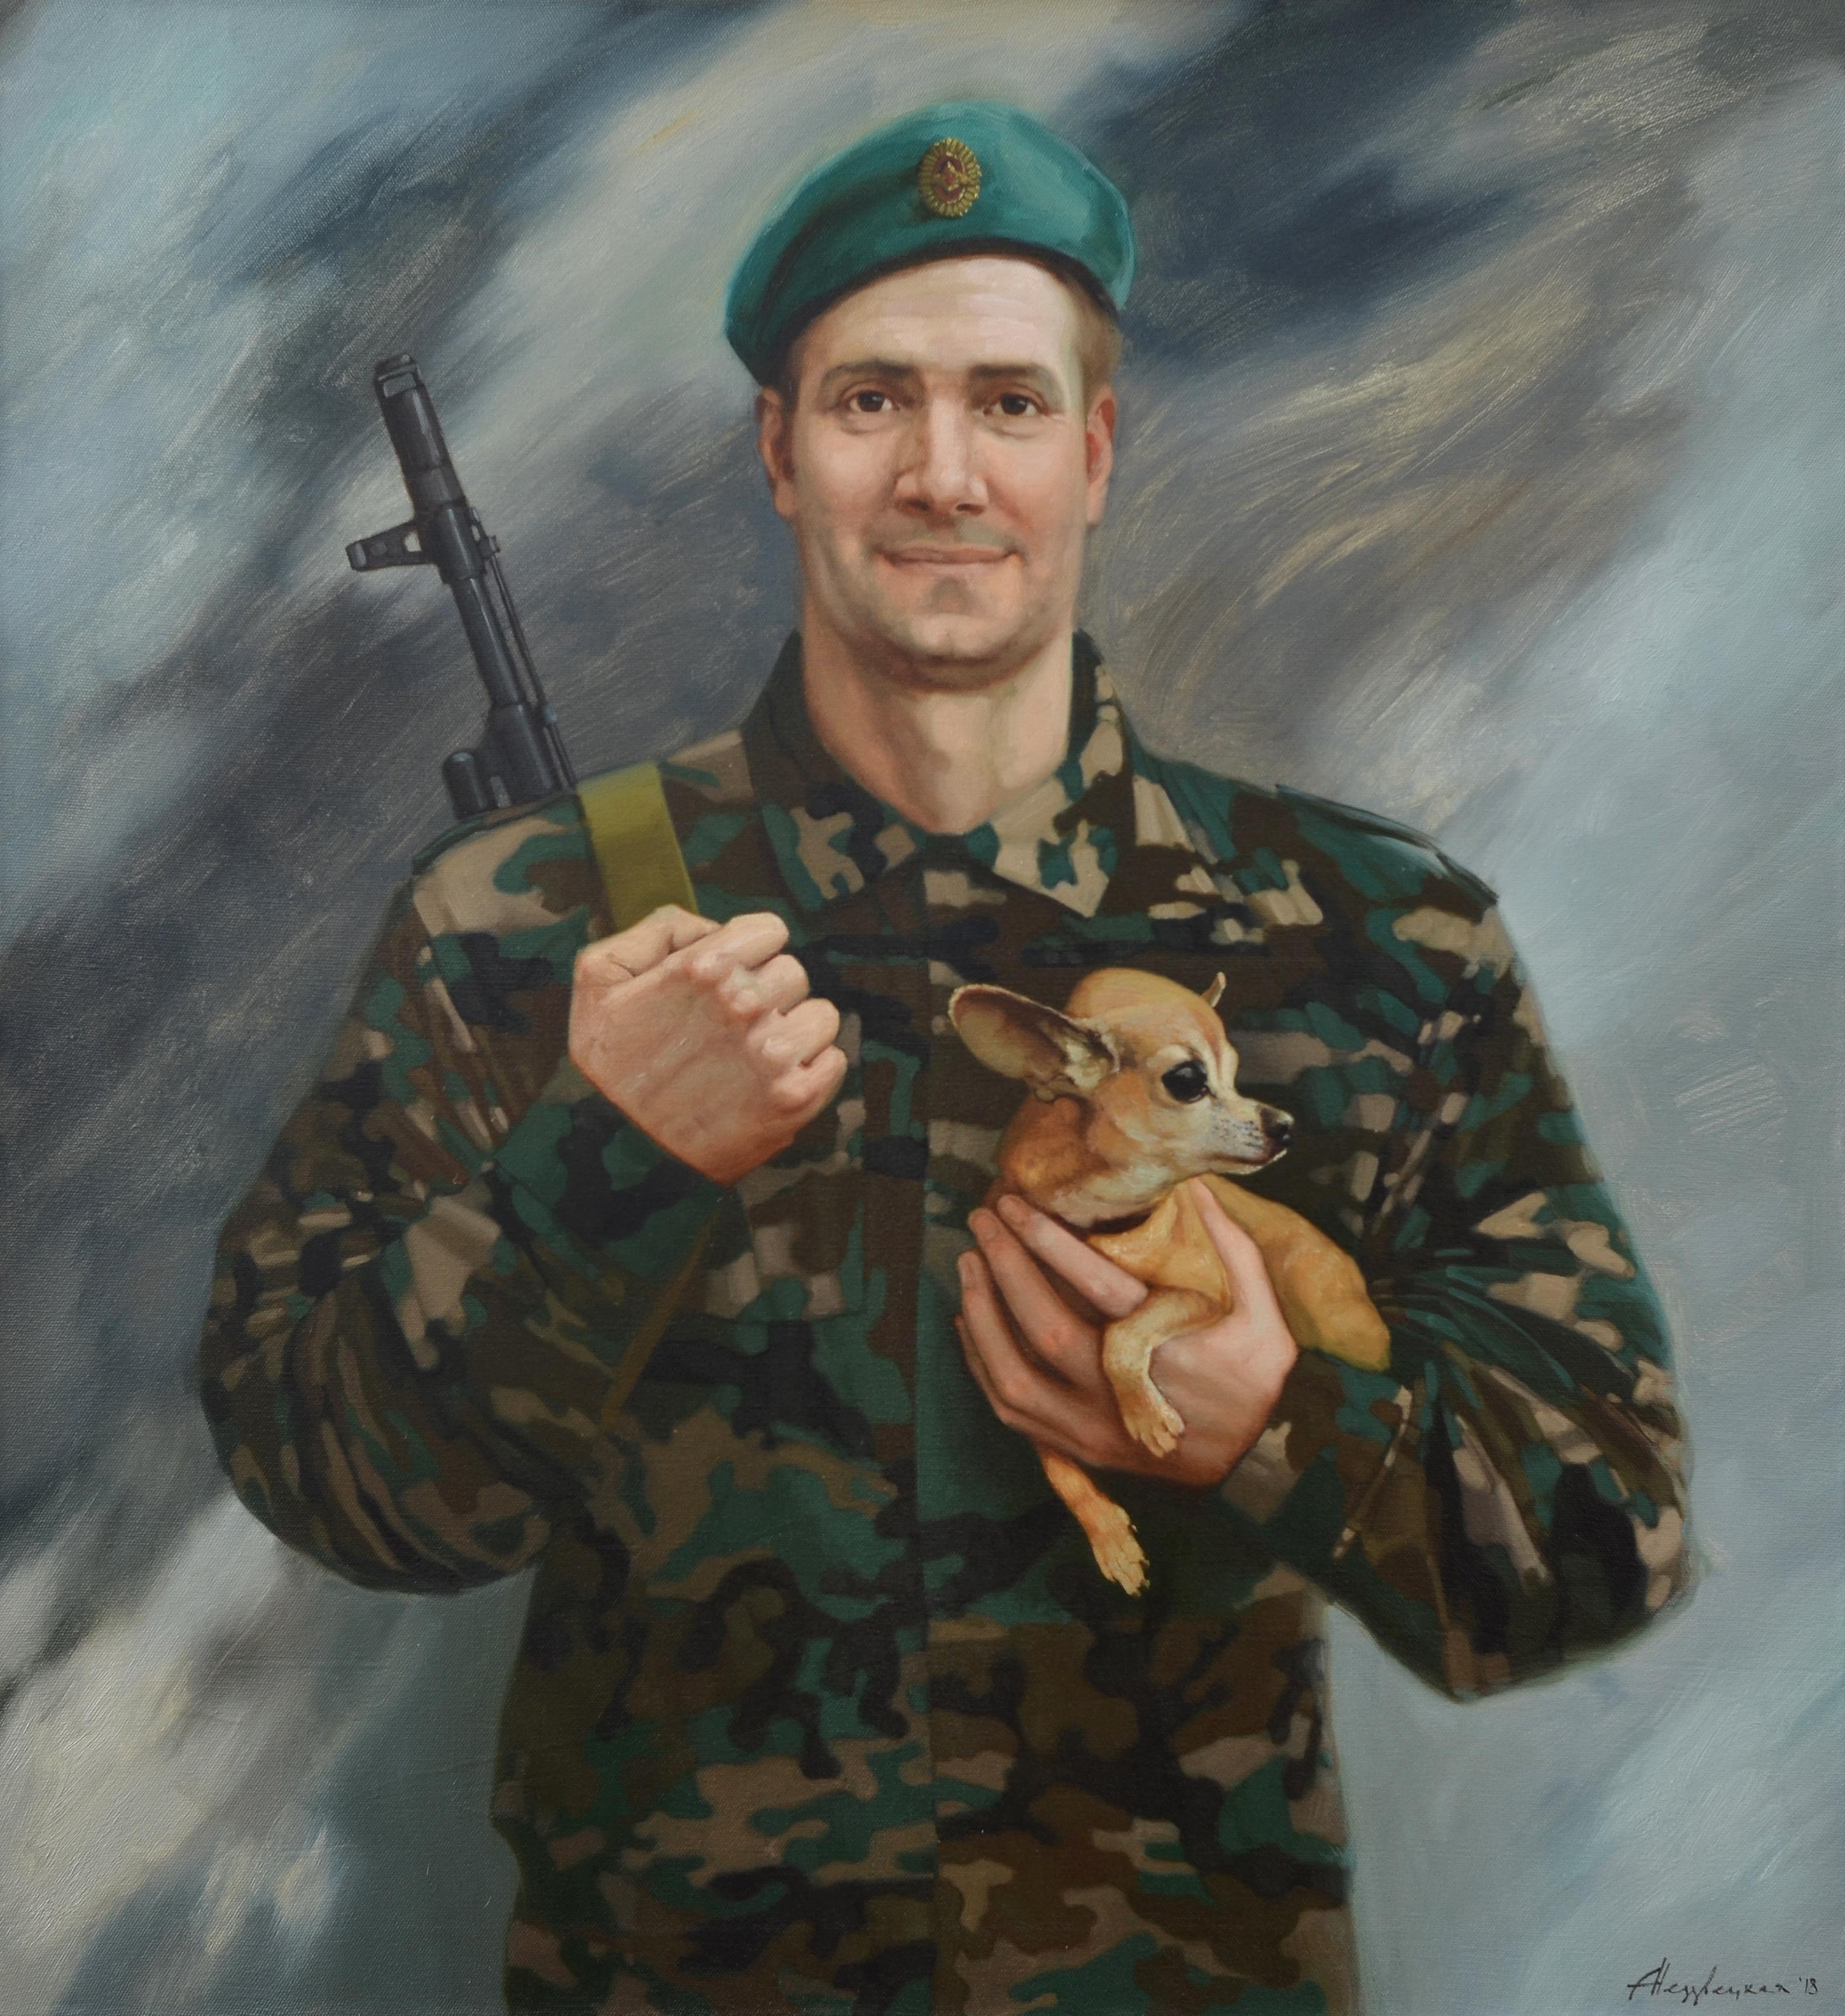 Border guard with a dog